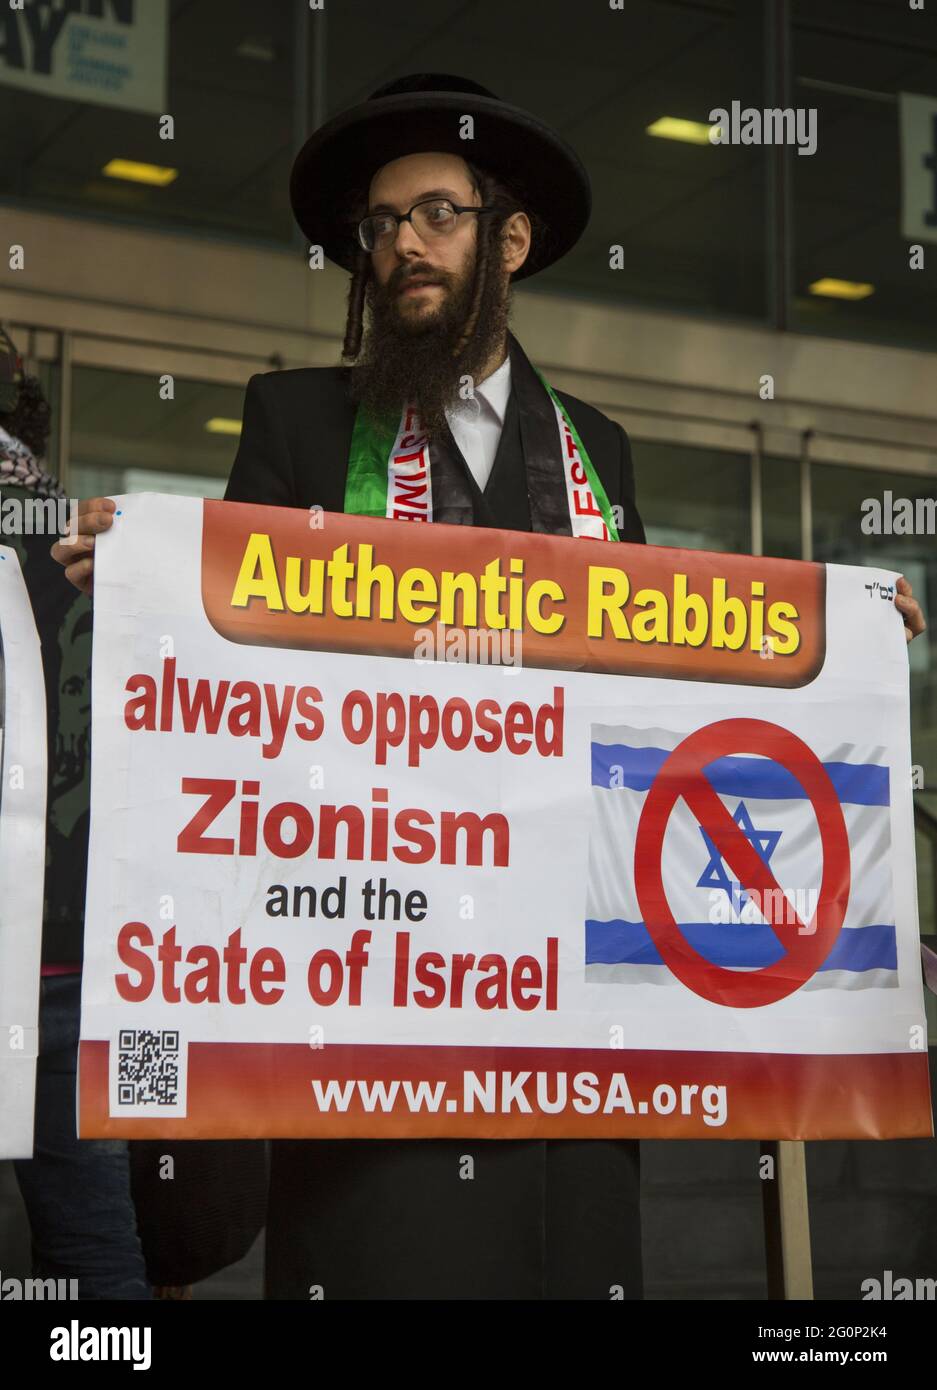 CUNY students and others demonstrate at John Jay College for CUNY to divest and cut all ties with Israel who is devastating the Palestinian people in Gaza and elsewhere in Israel. Orthodox Rabbis opposed to Zionism and the State of Israel. Stock Photo